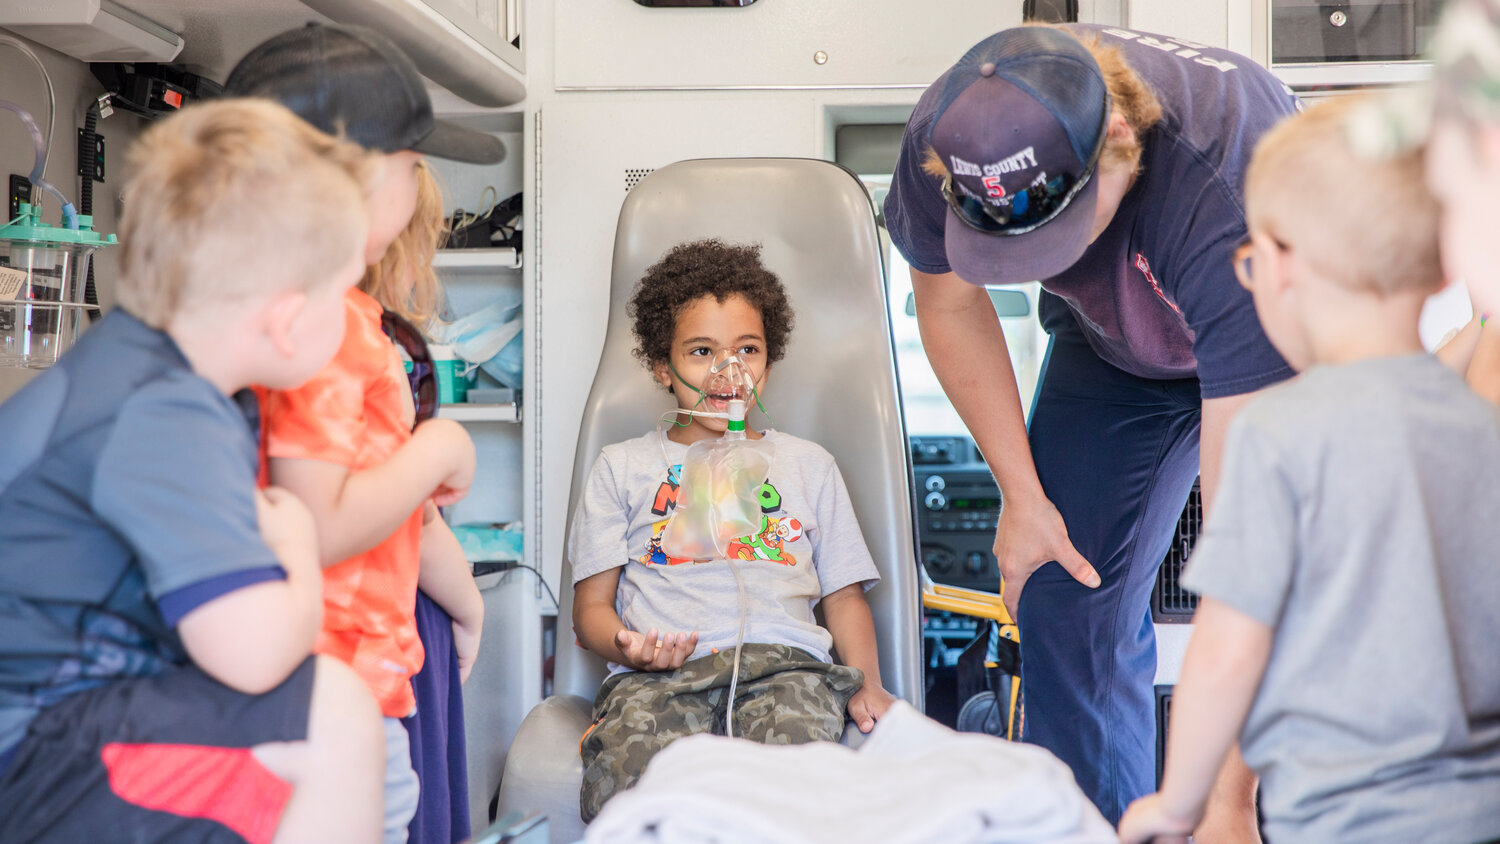 Noah Harrison, 6, tries on the oxygen mask in an ambulance during a visit to Lewis County Fire District 5 in Napavine on Tuesday, June 7.